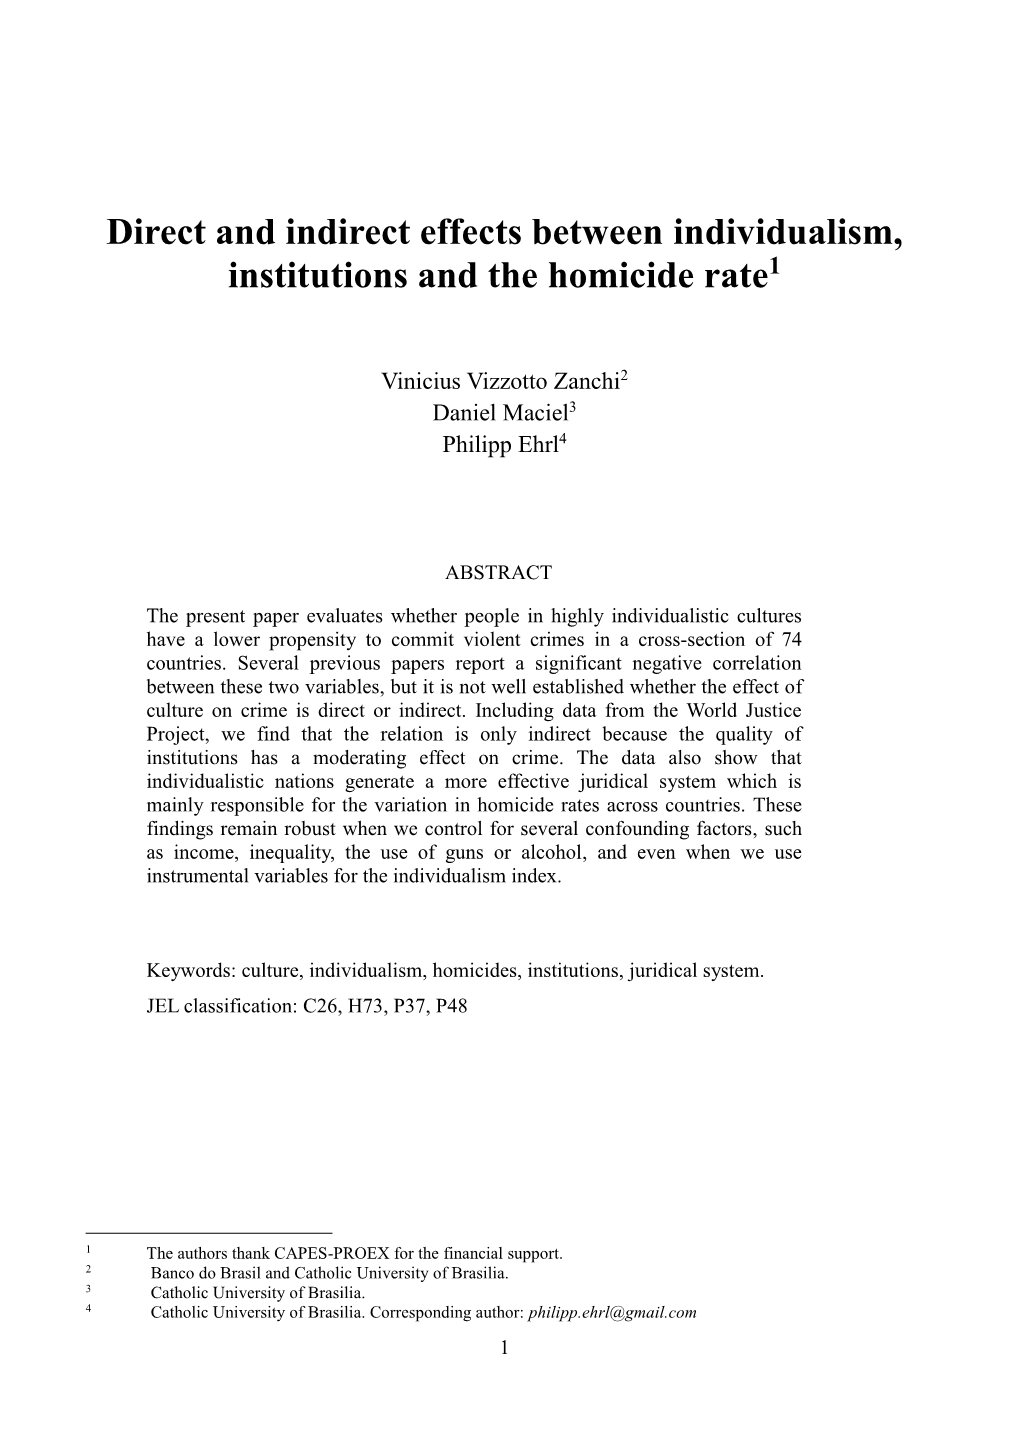 Direct and Indirect Effects Between Individualism, Institutions and the Homicide Rate1